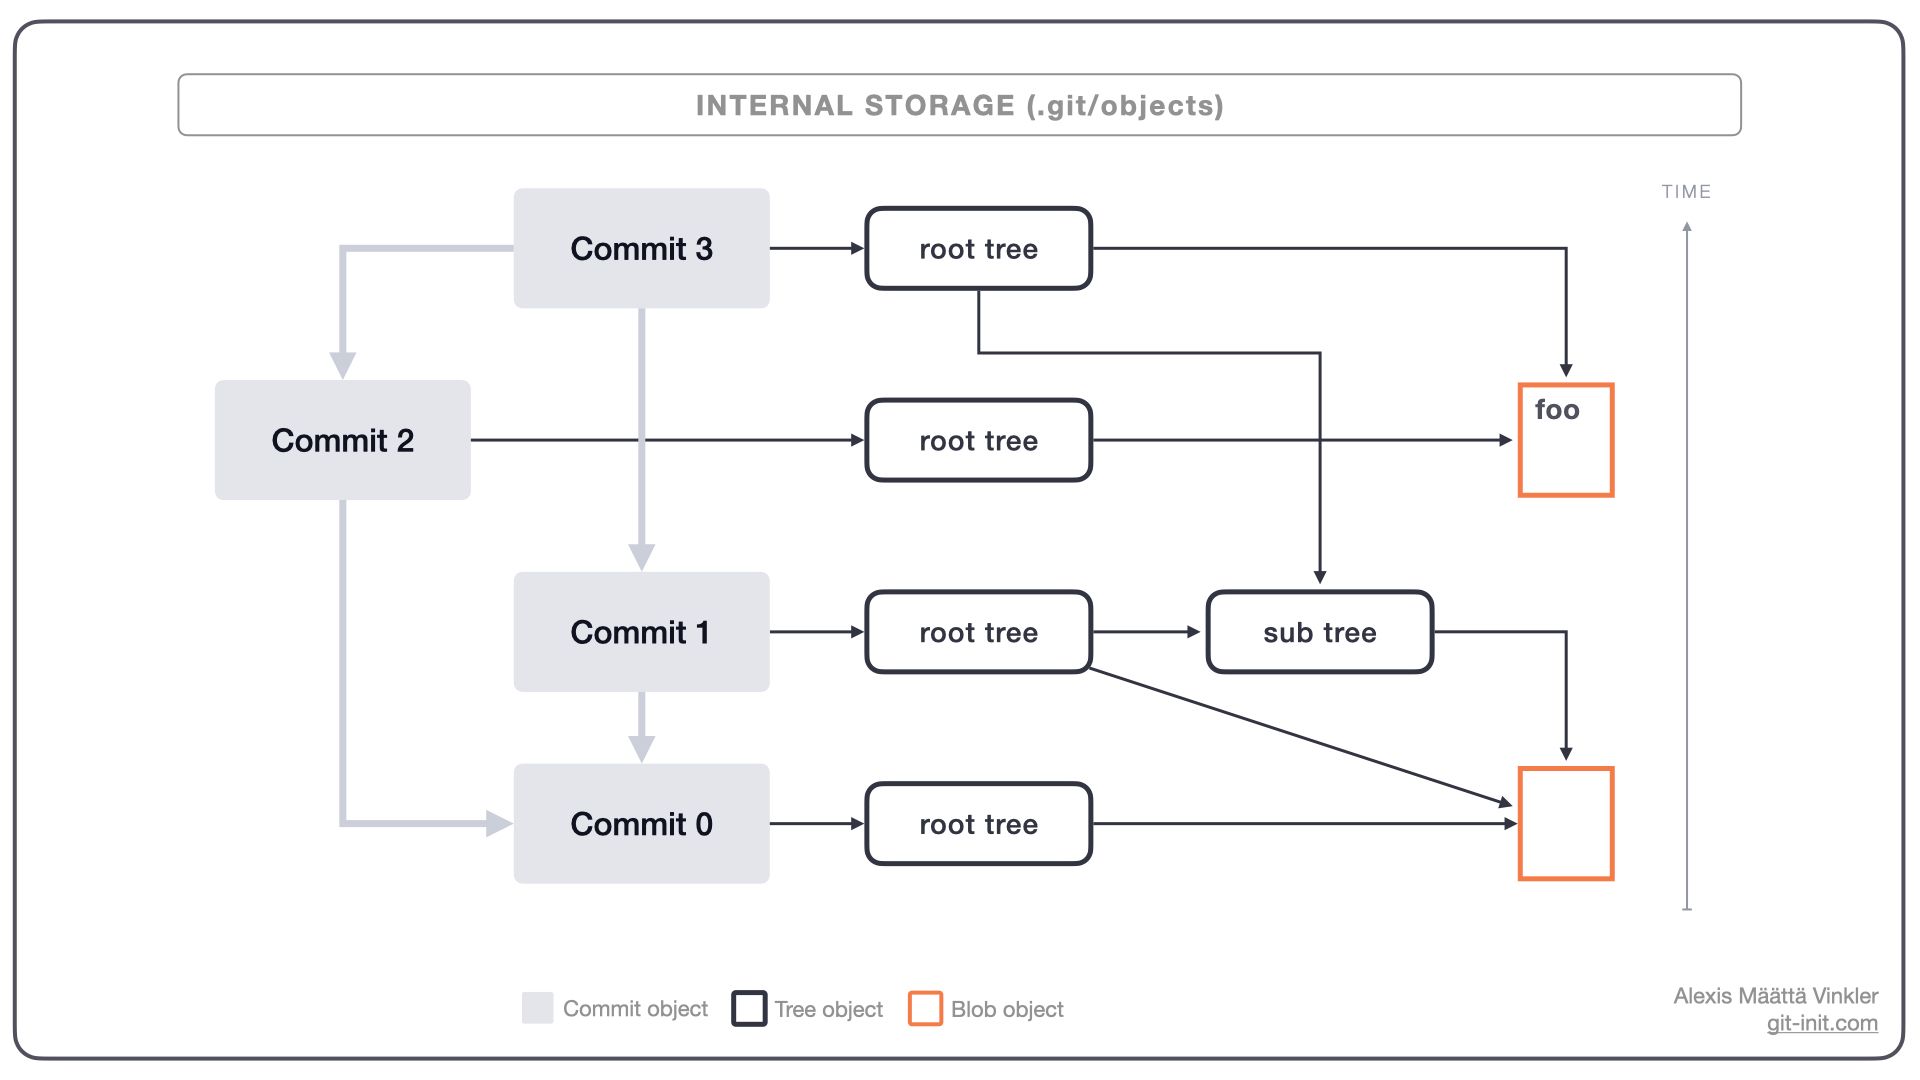 Conceptual model of a Git history with its internal "file storage" objects visualised. 